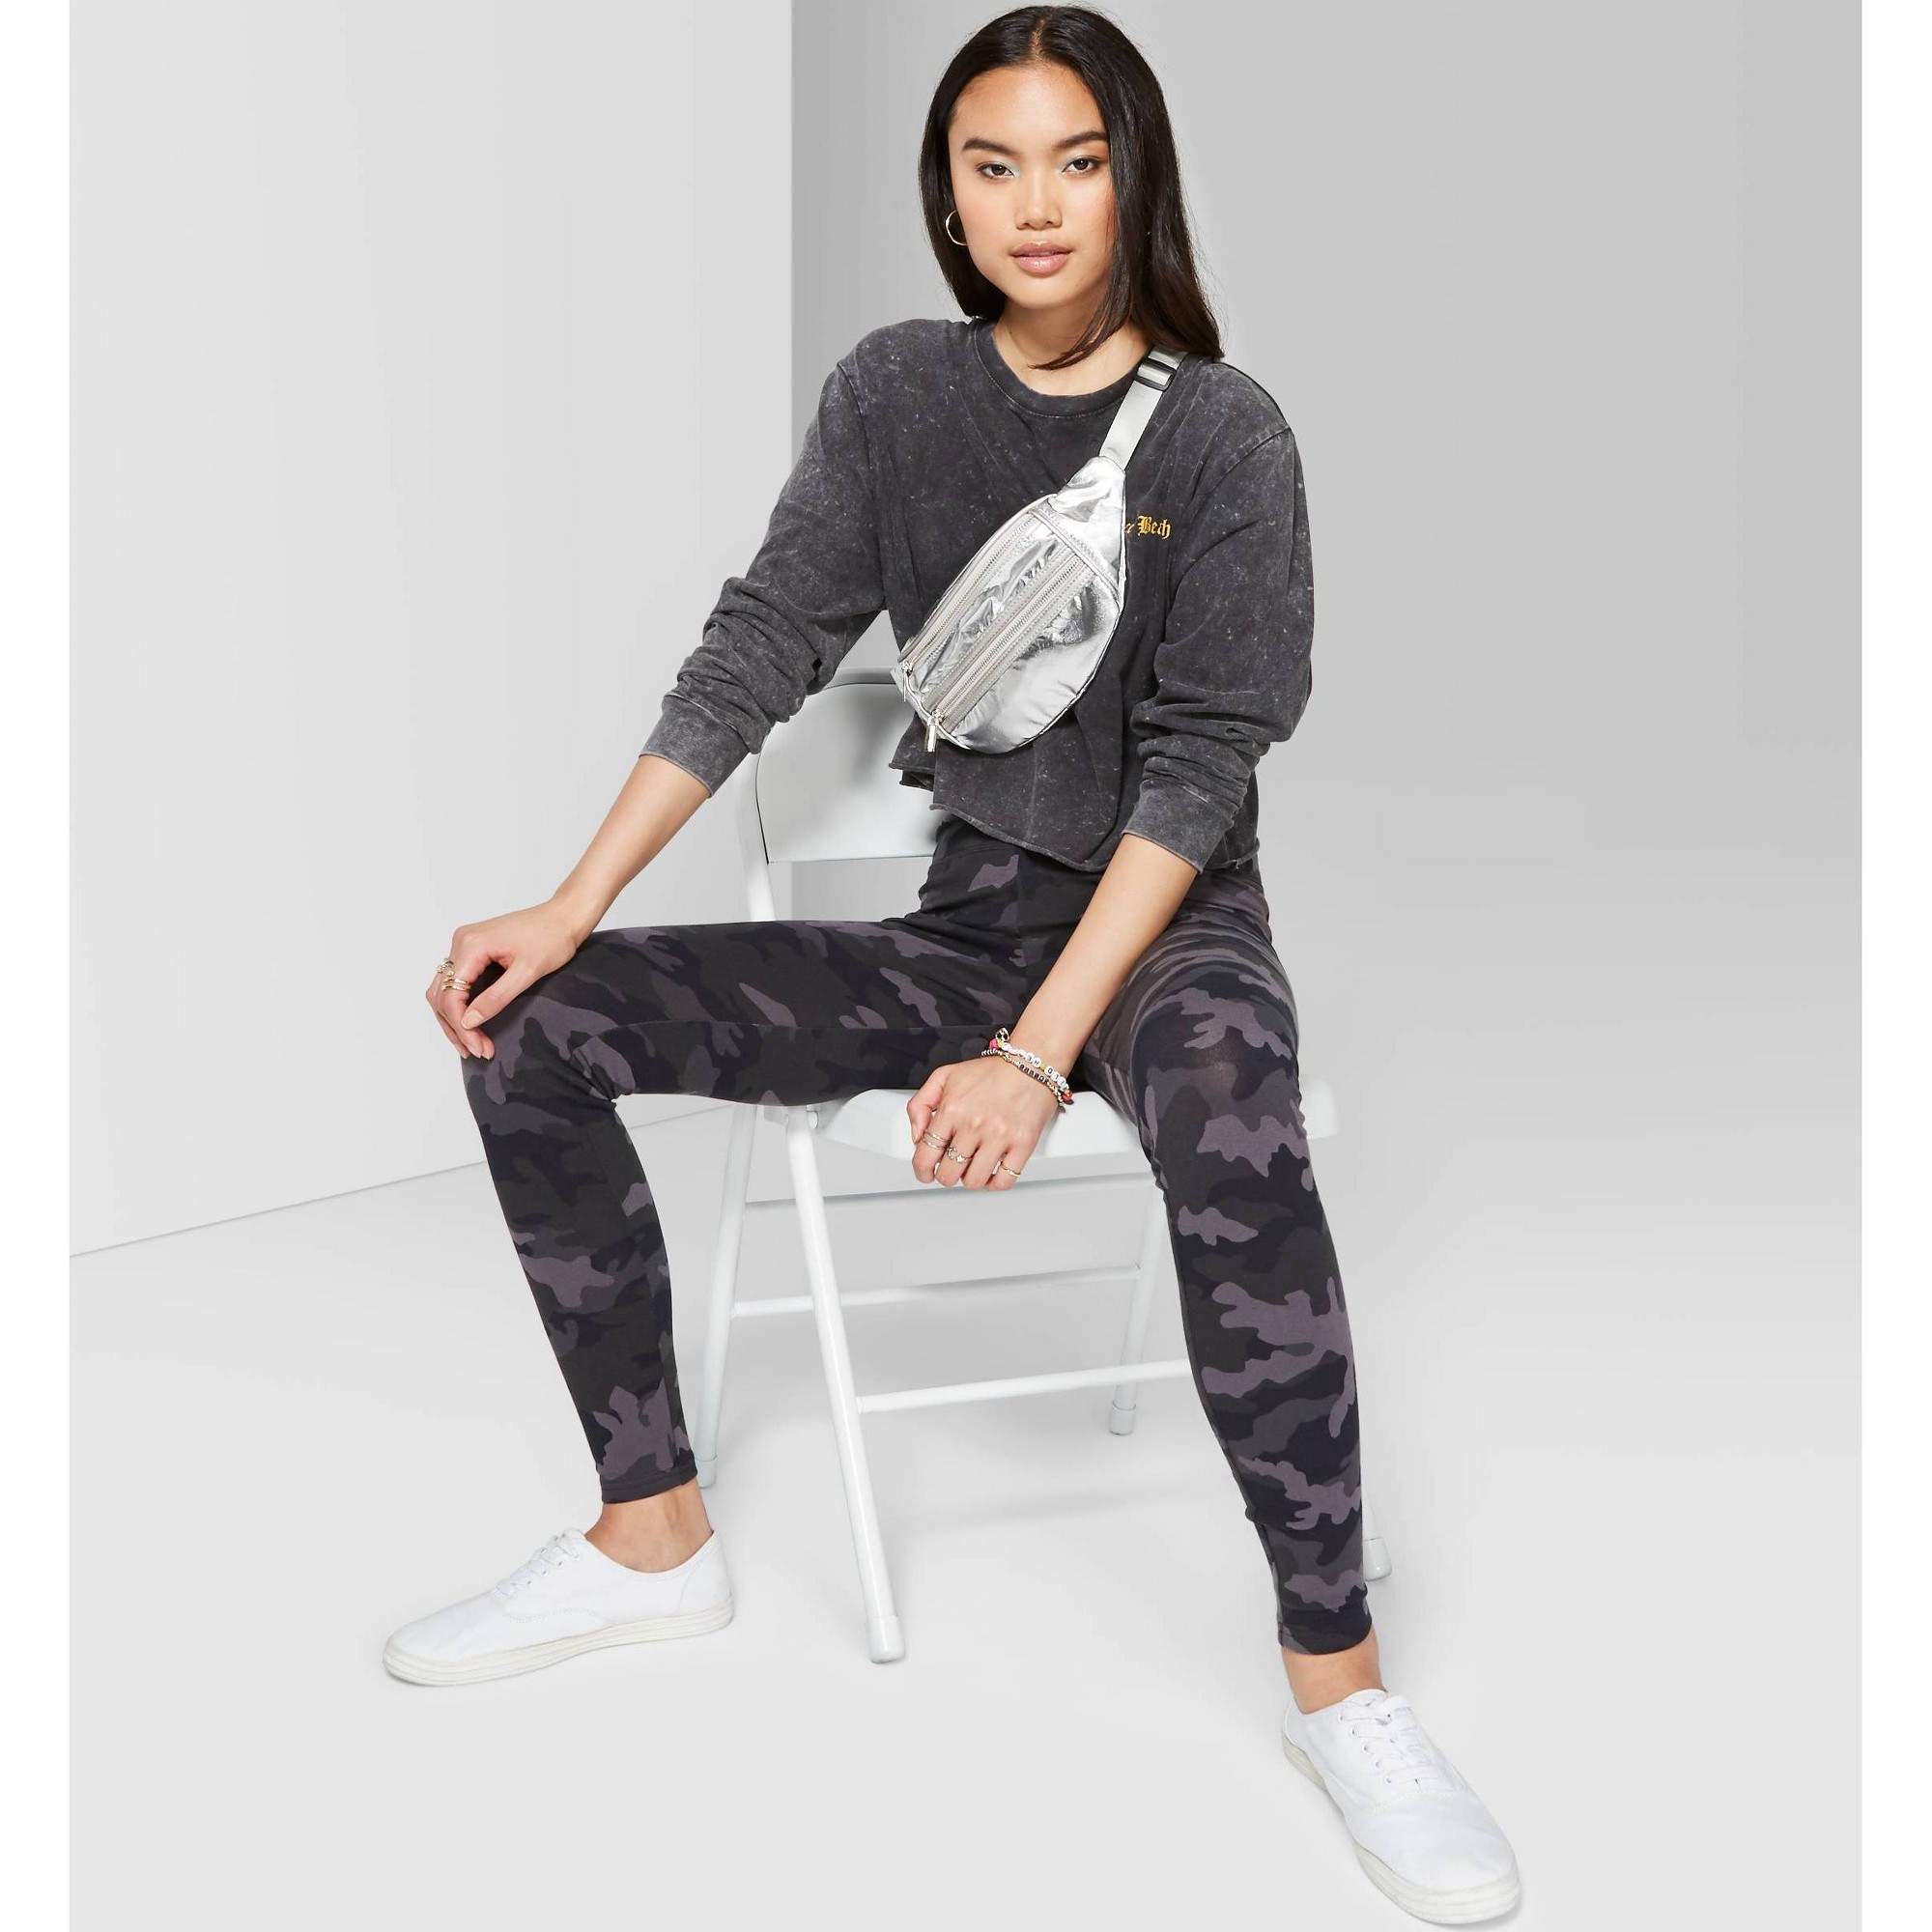 Women's Camo Print High-Rise Leggings - Wild Fable Gray M, Size: Medium, by Wild  Fable